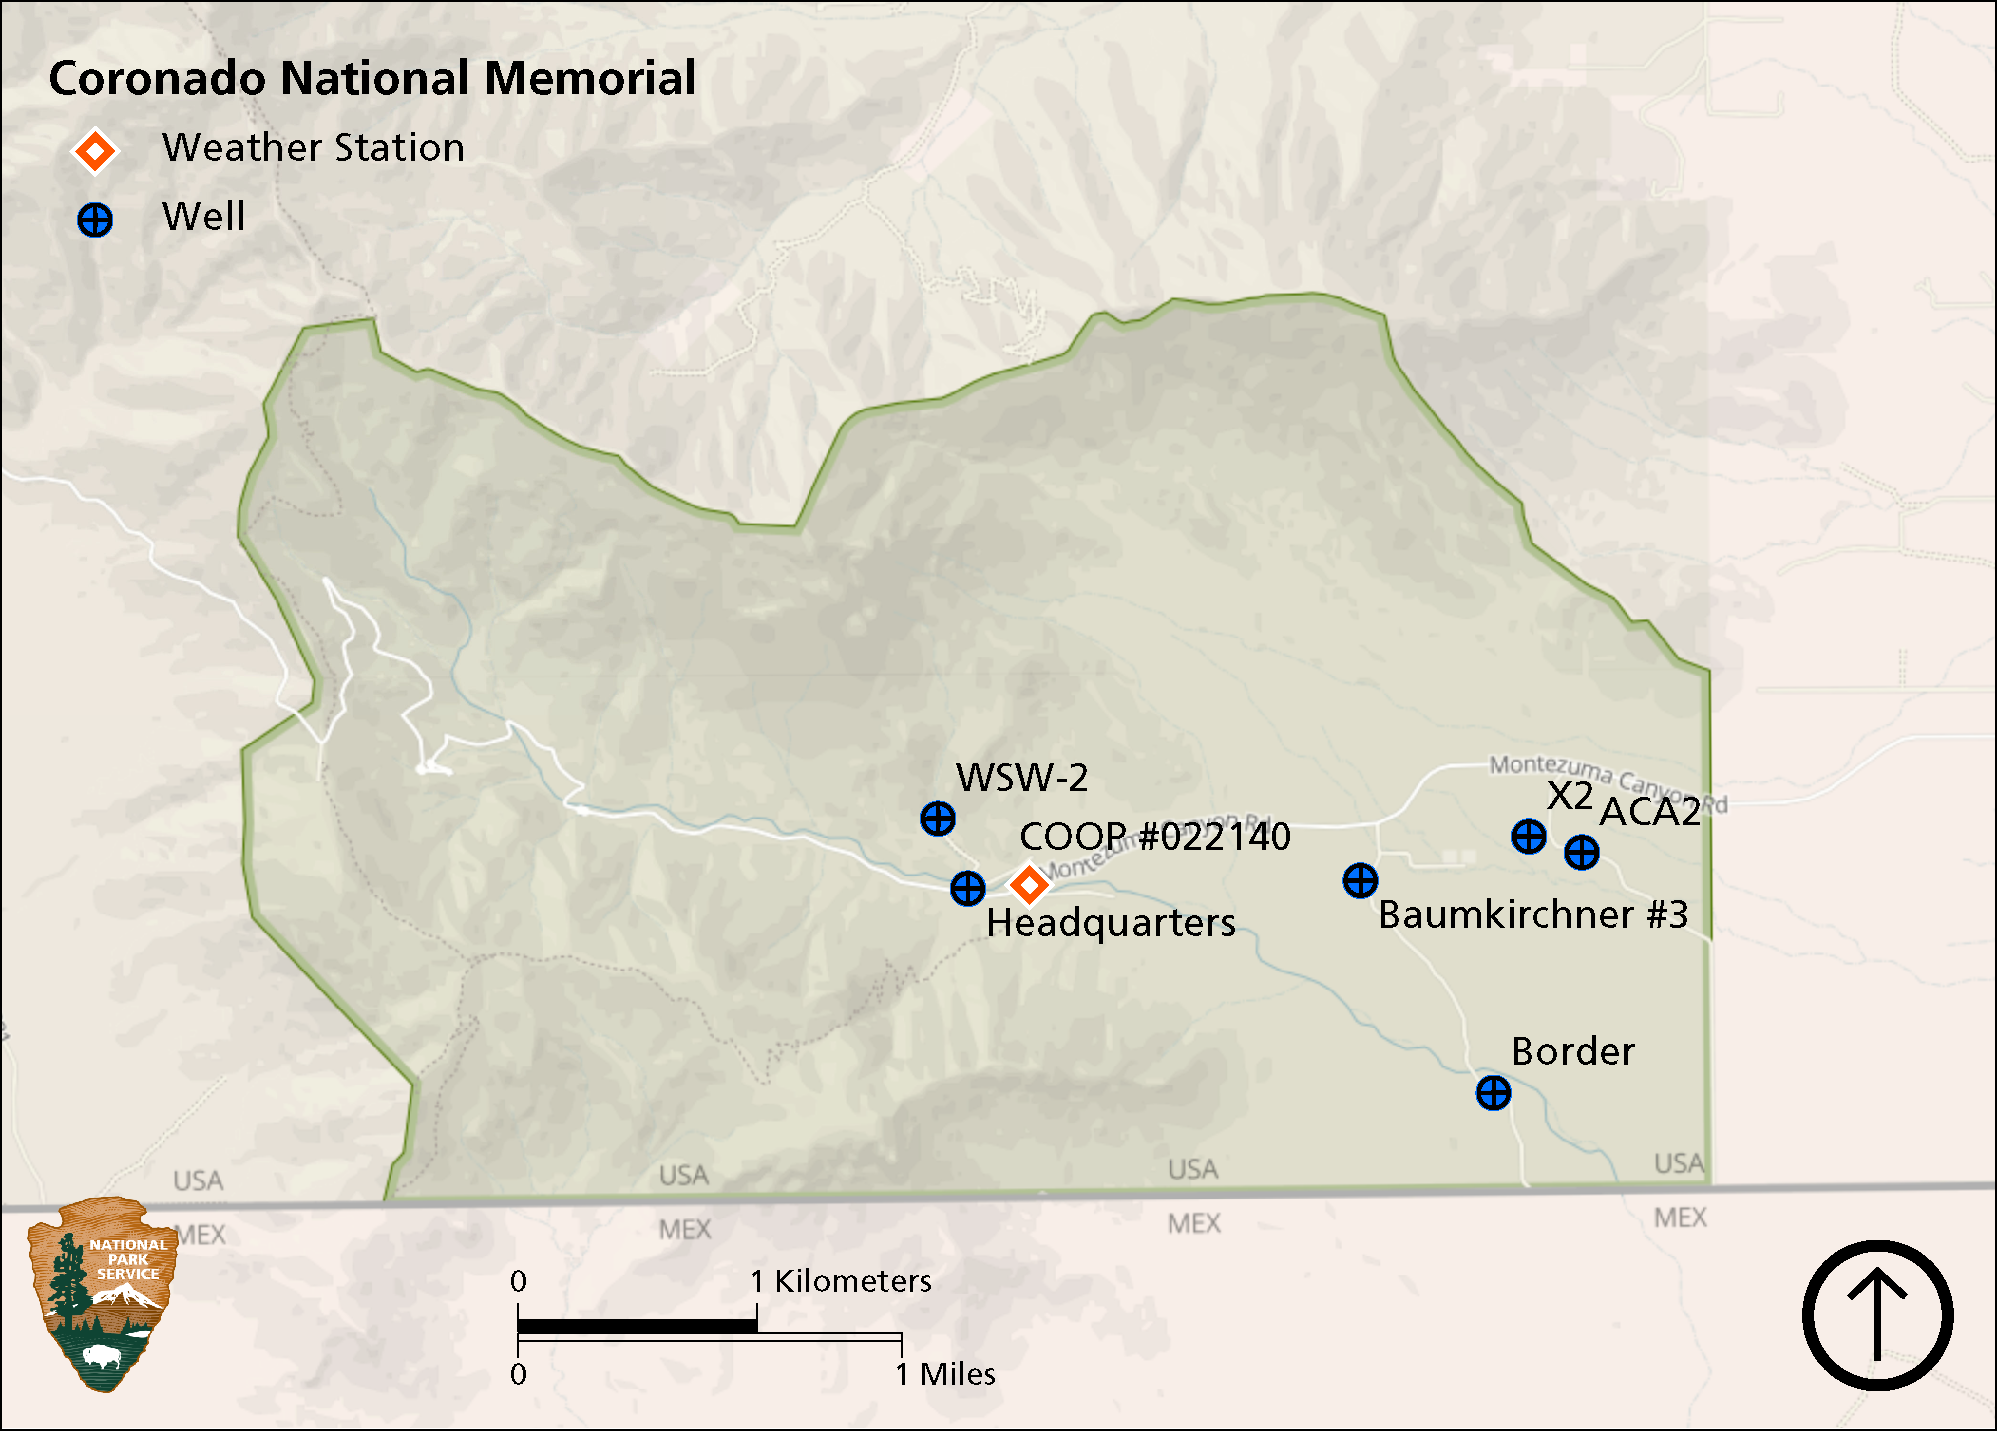 Map of Coronado National Memorial showing location of weather stations and groundwater monitoring wells.